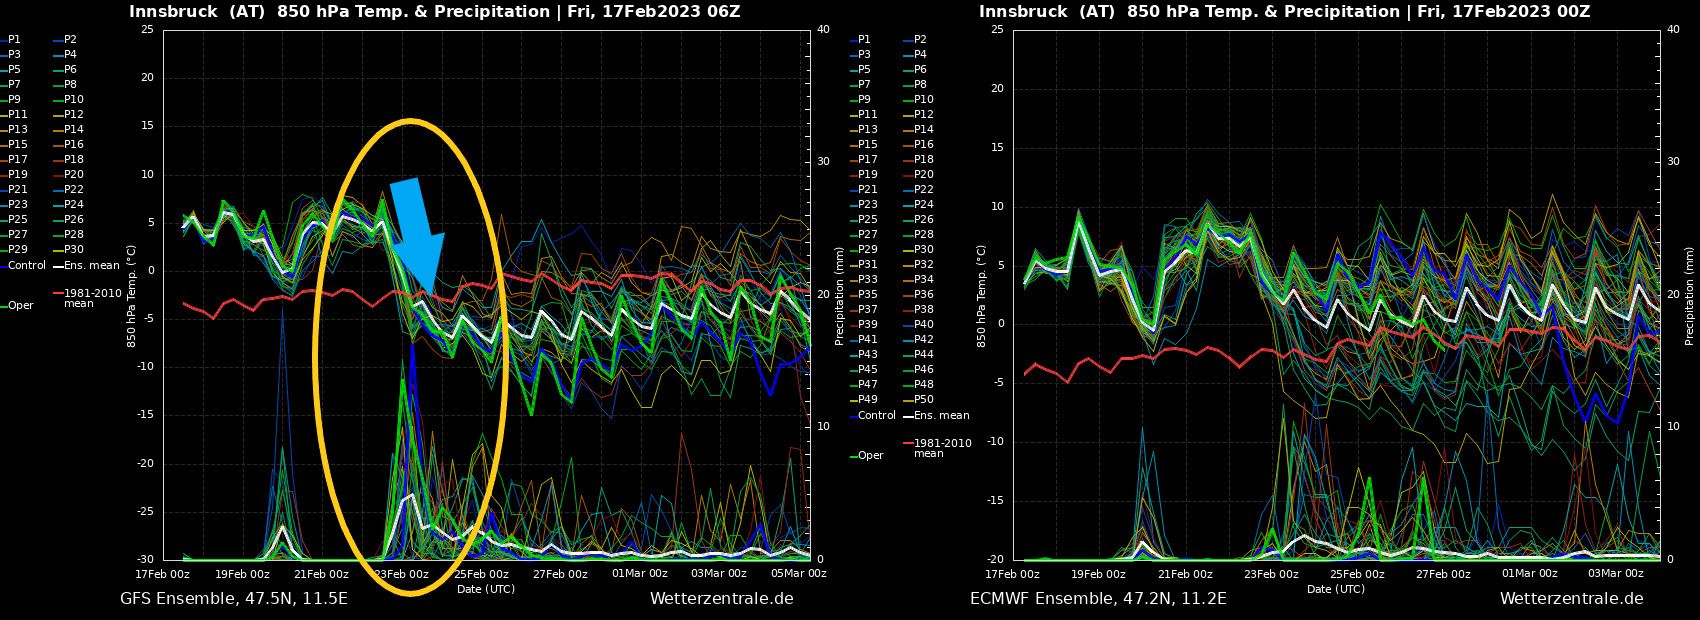 Differences in weather models are large. Left GFS and right ECMWF (wetterzentrale.de)